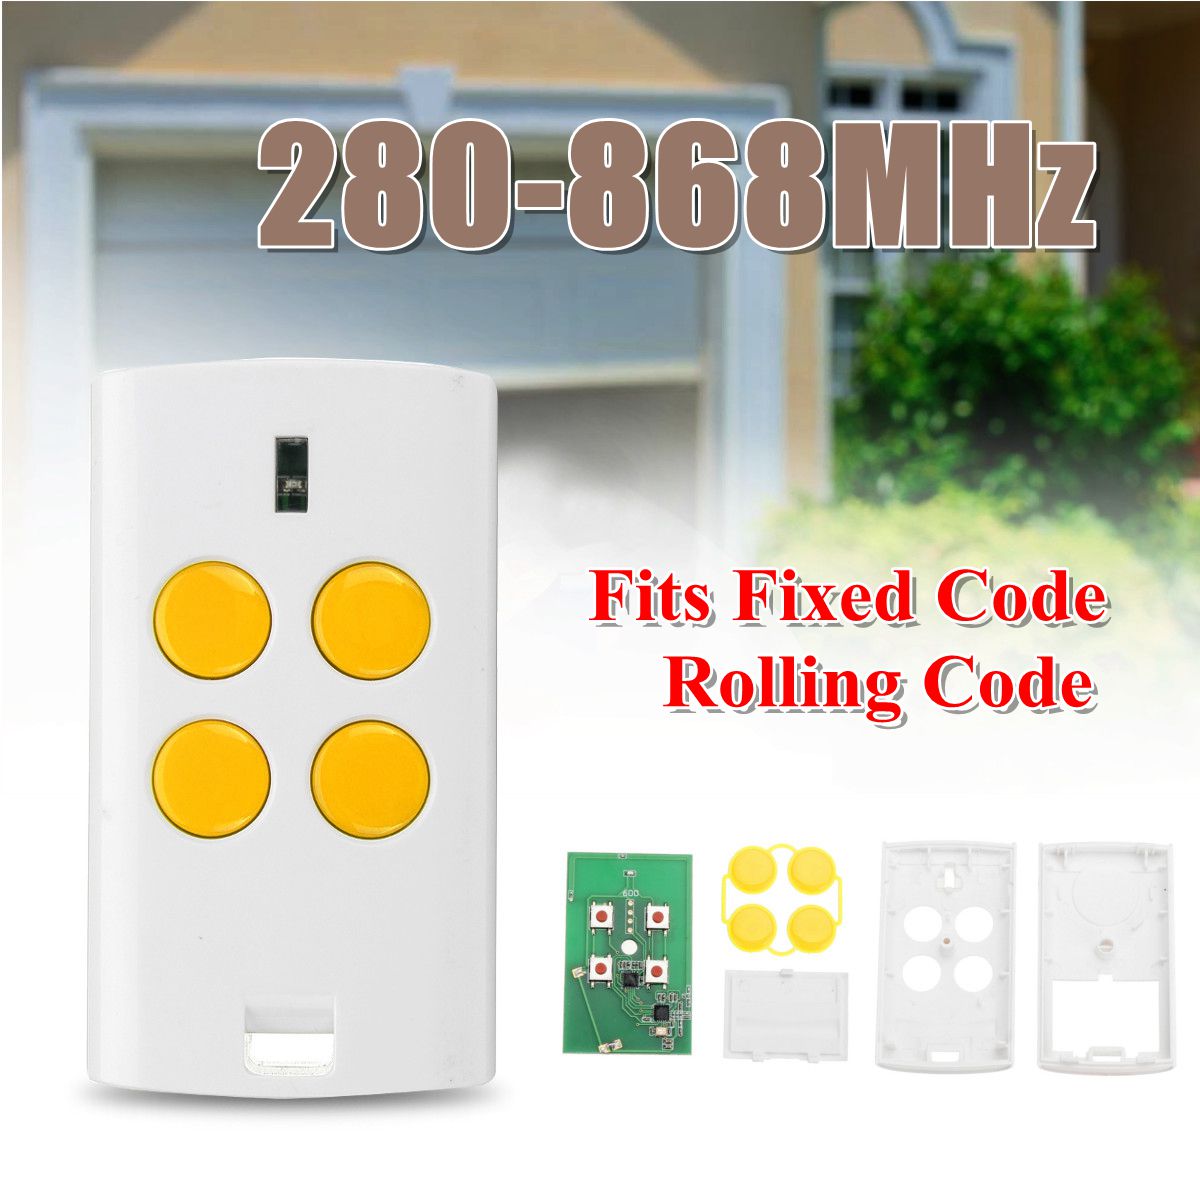 4-Button-Universal-Garage-Gate-Multi-Remote-Control-Switch-280-868MHz-Fits-Fixed-Rolling-Code-1291882